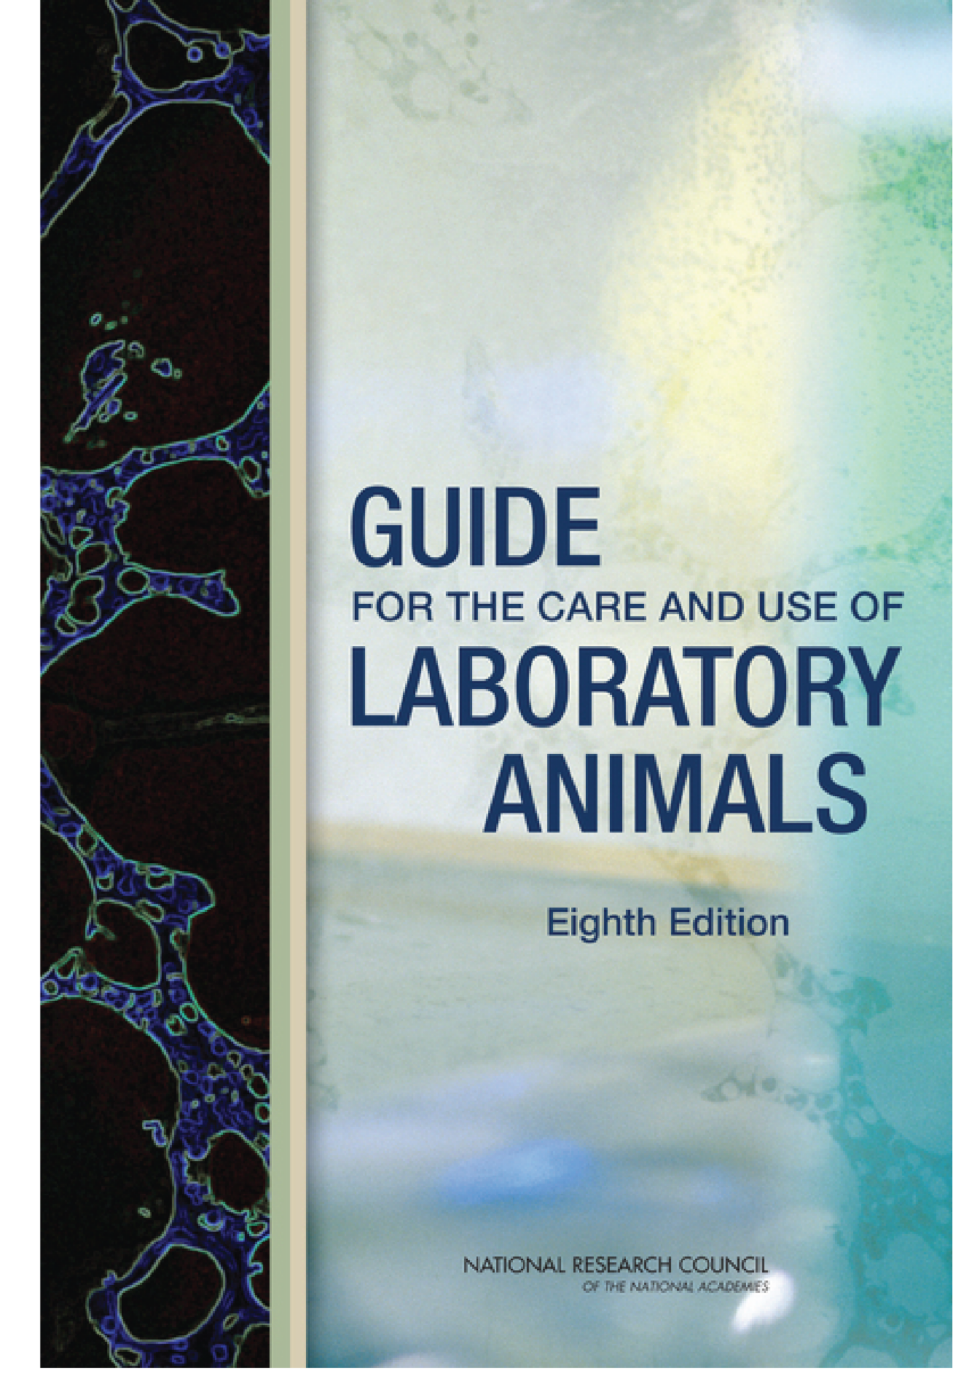 Front cover of the Guide for the Care and Use of Laboratory Animals